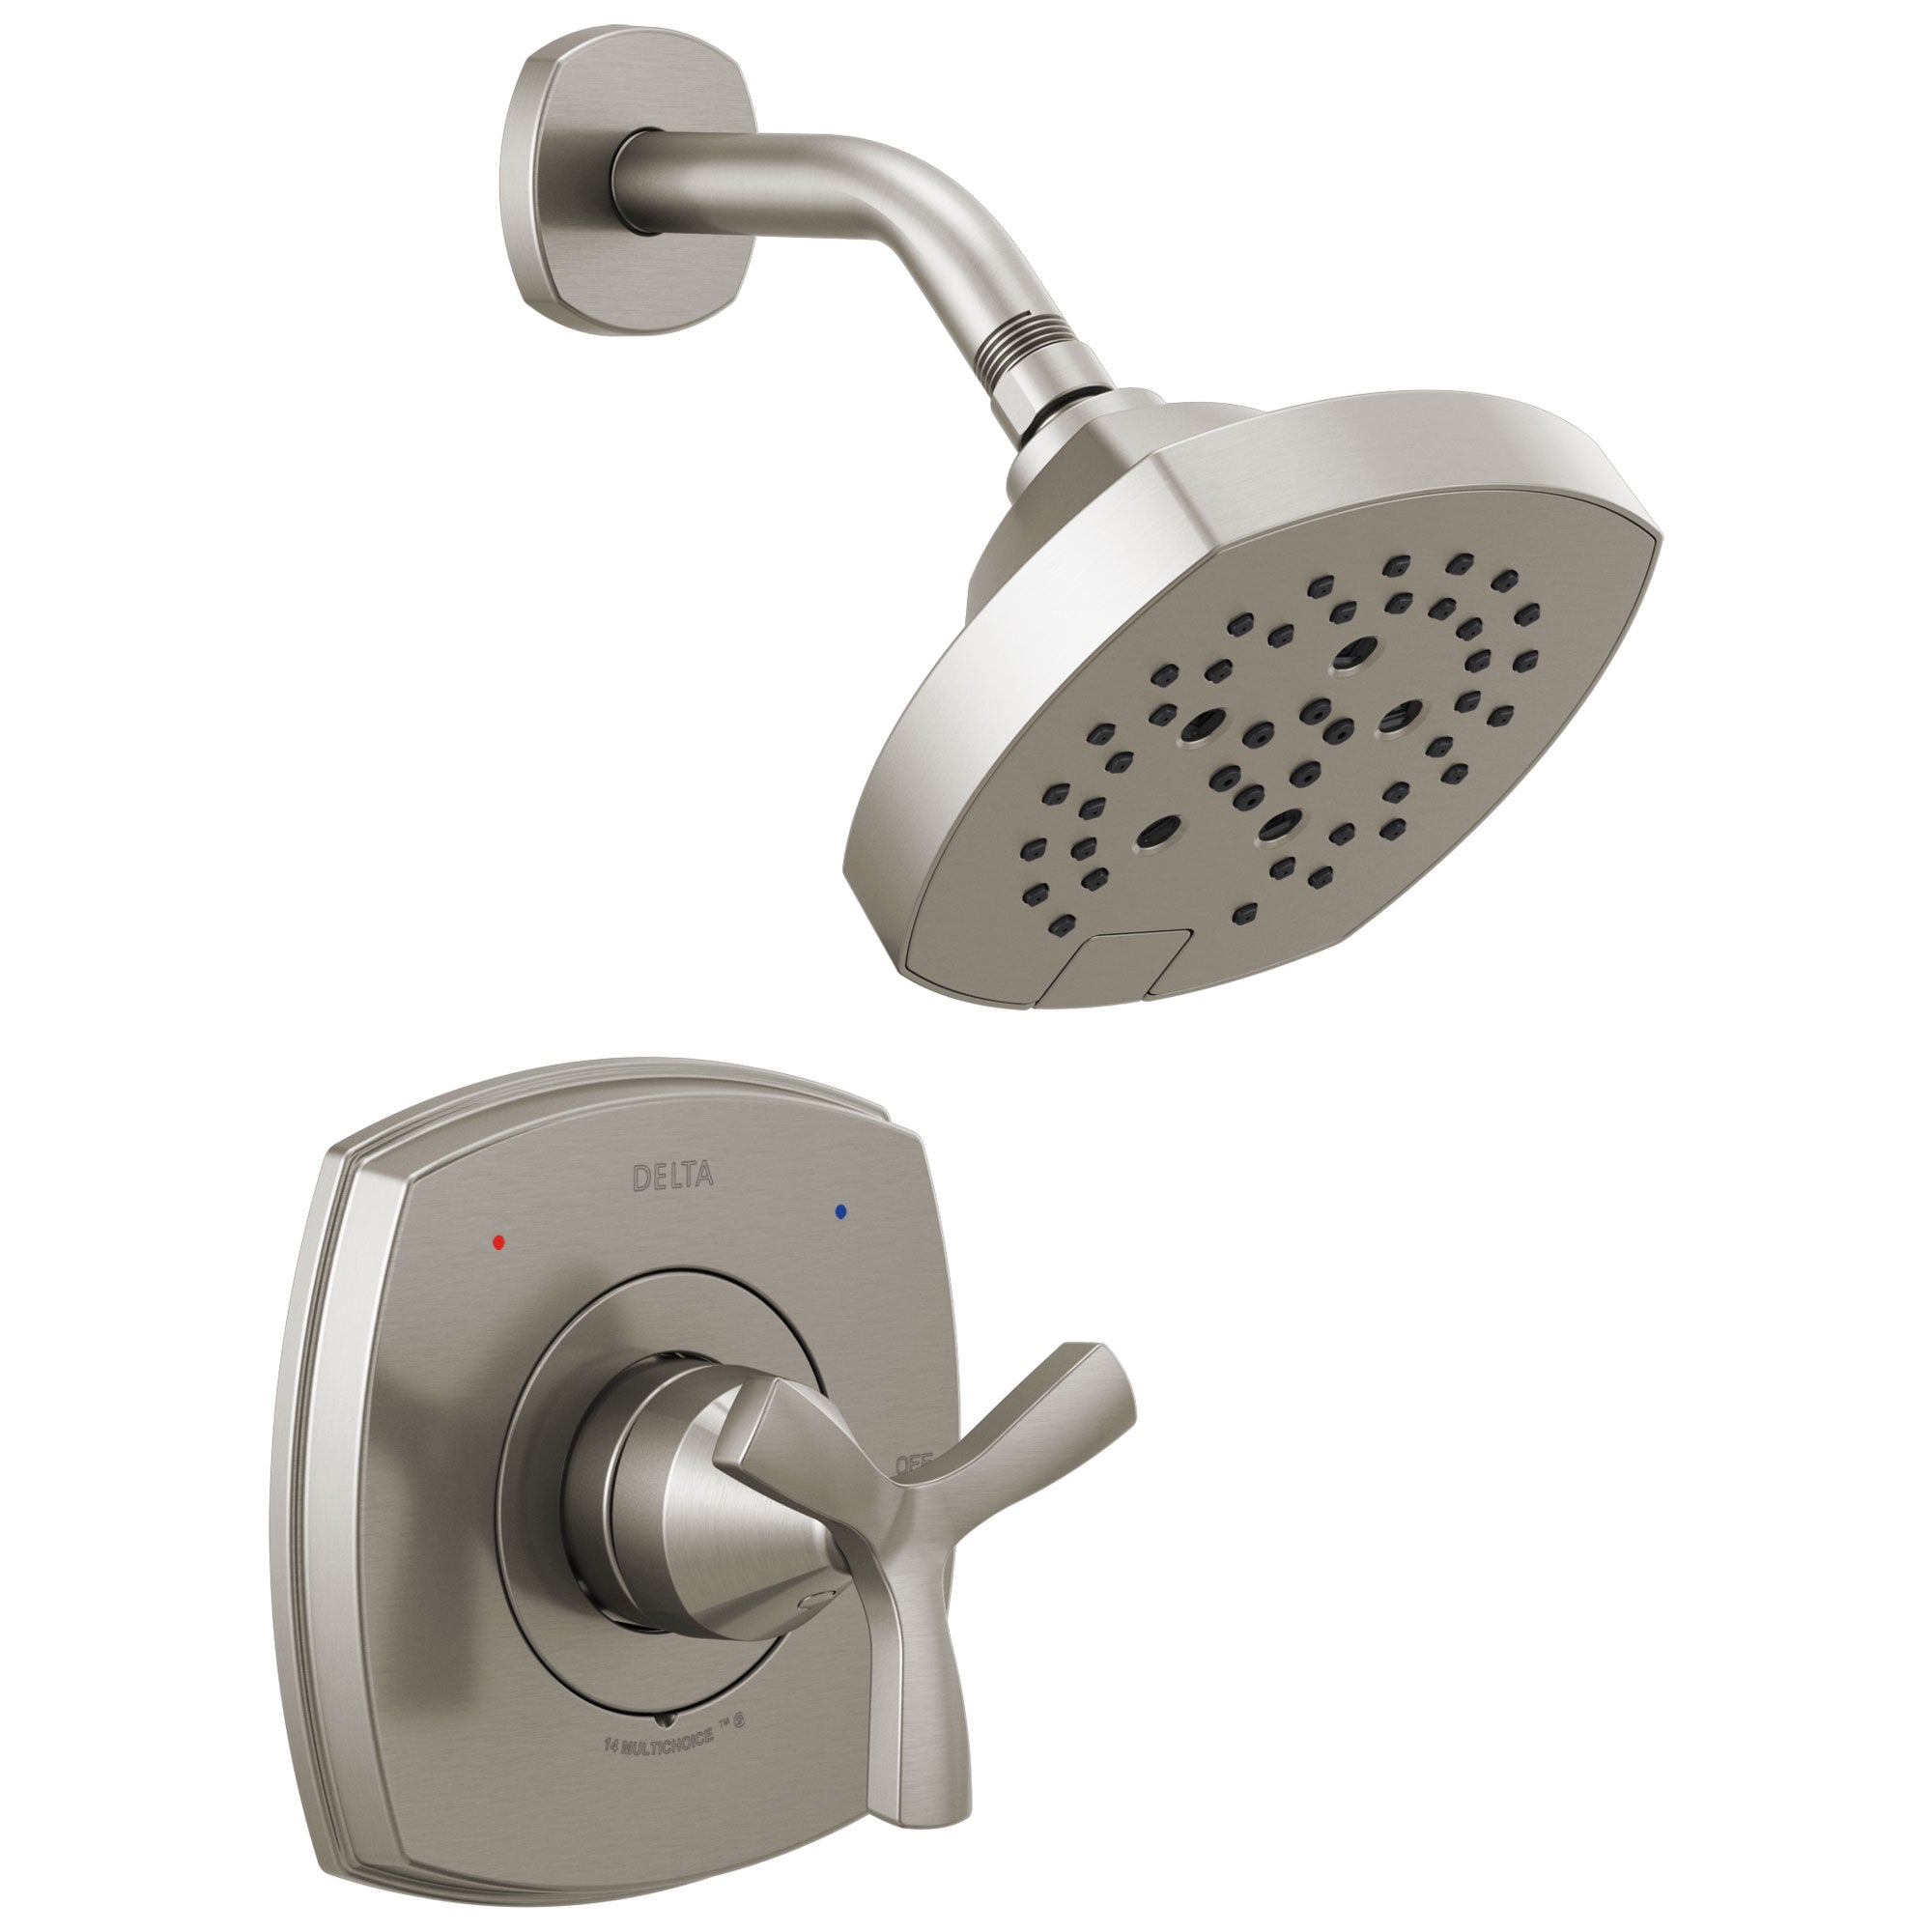 Delta Stryke Stainless Steel Finish 14 Series Shower Only Faucet Includes Helo Cross Handle, Cartridge, and Rough-in Valve without Stops D3493V